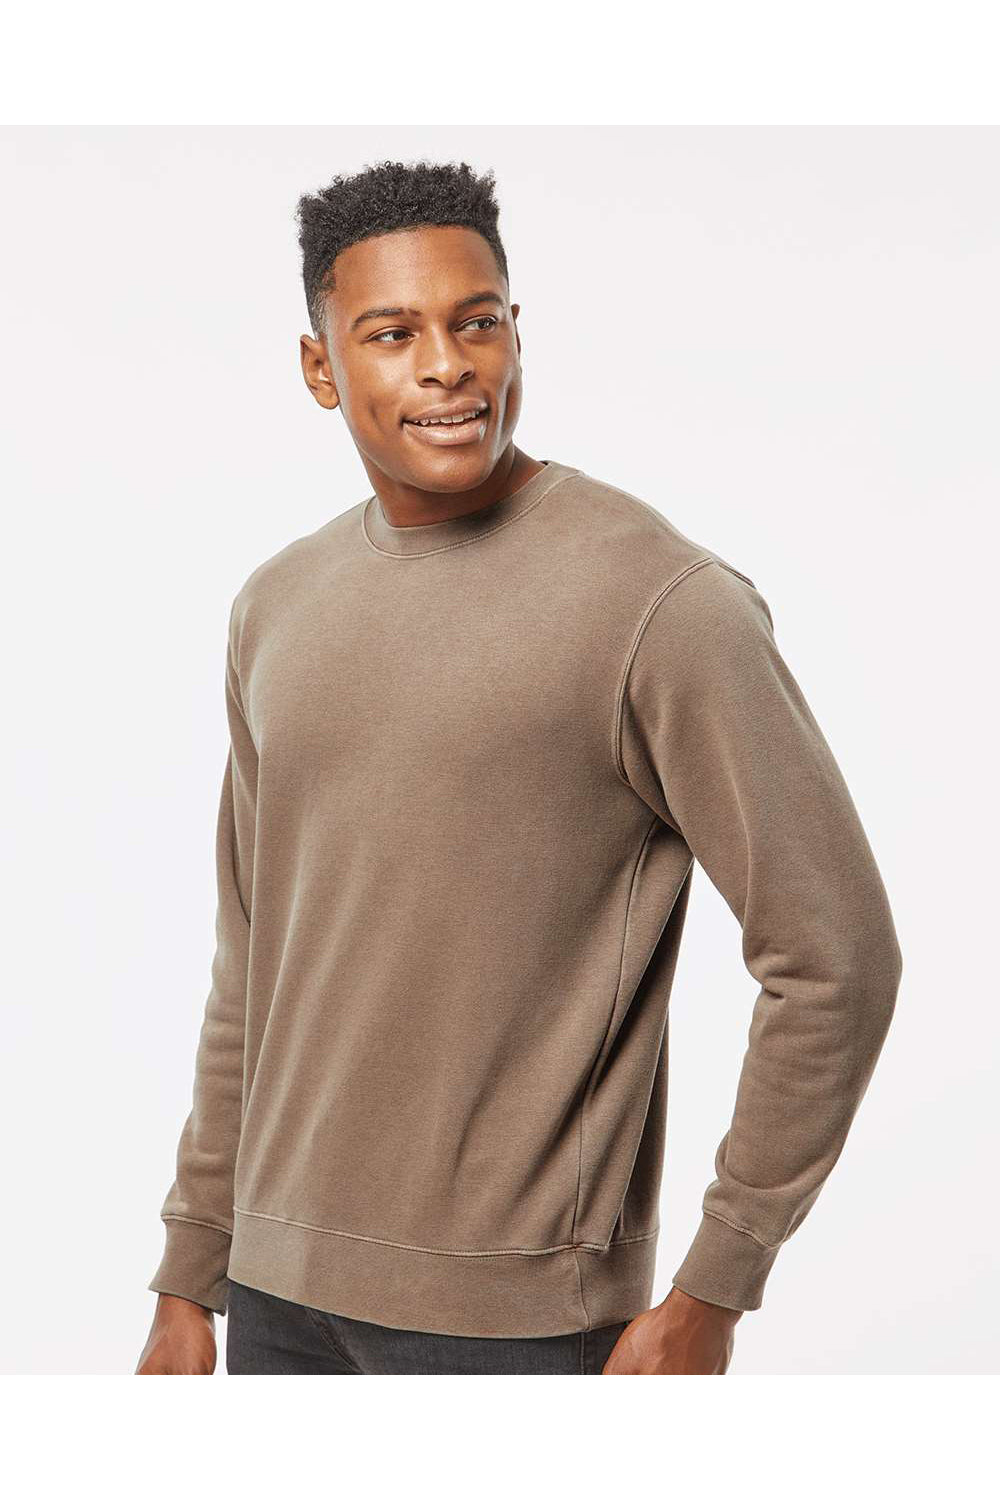 Independent Trading Co. PRM3500 Mens Pigment Dyed Crewneck Sweatshirt Clay Brown Model Side